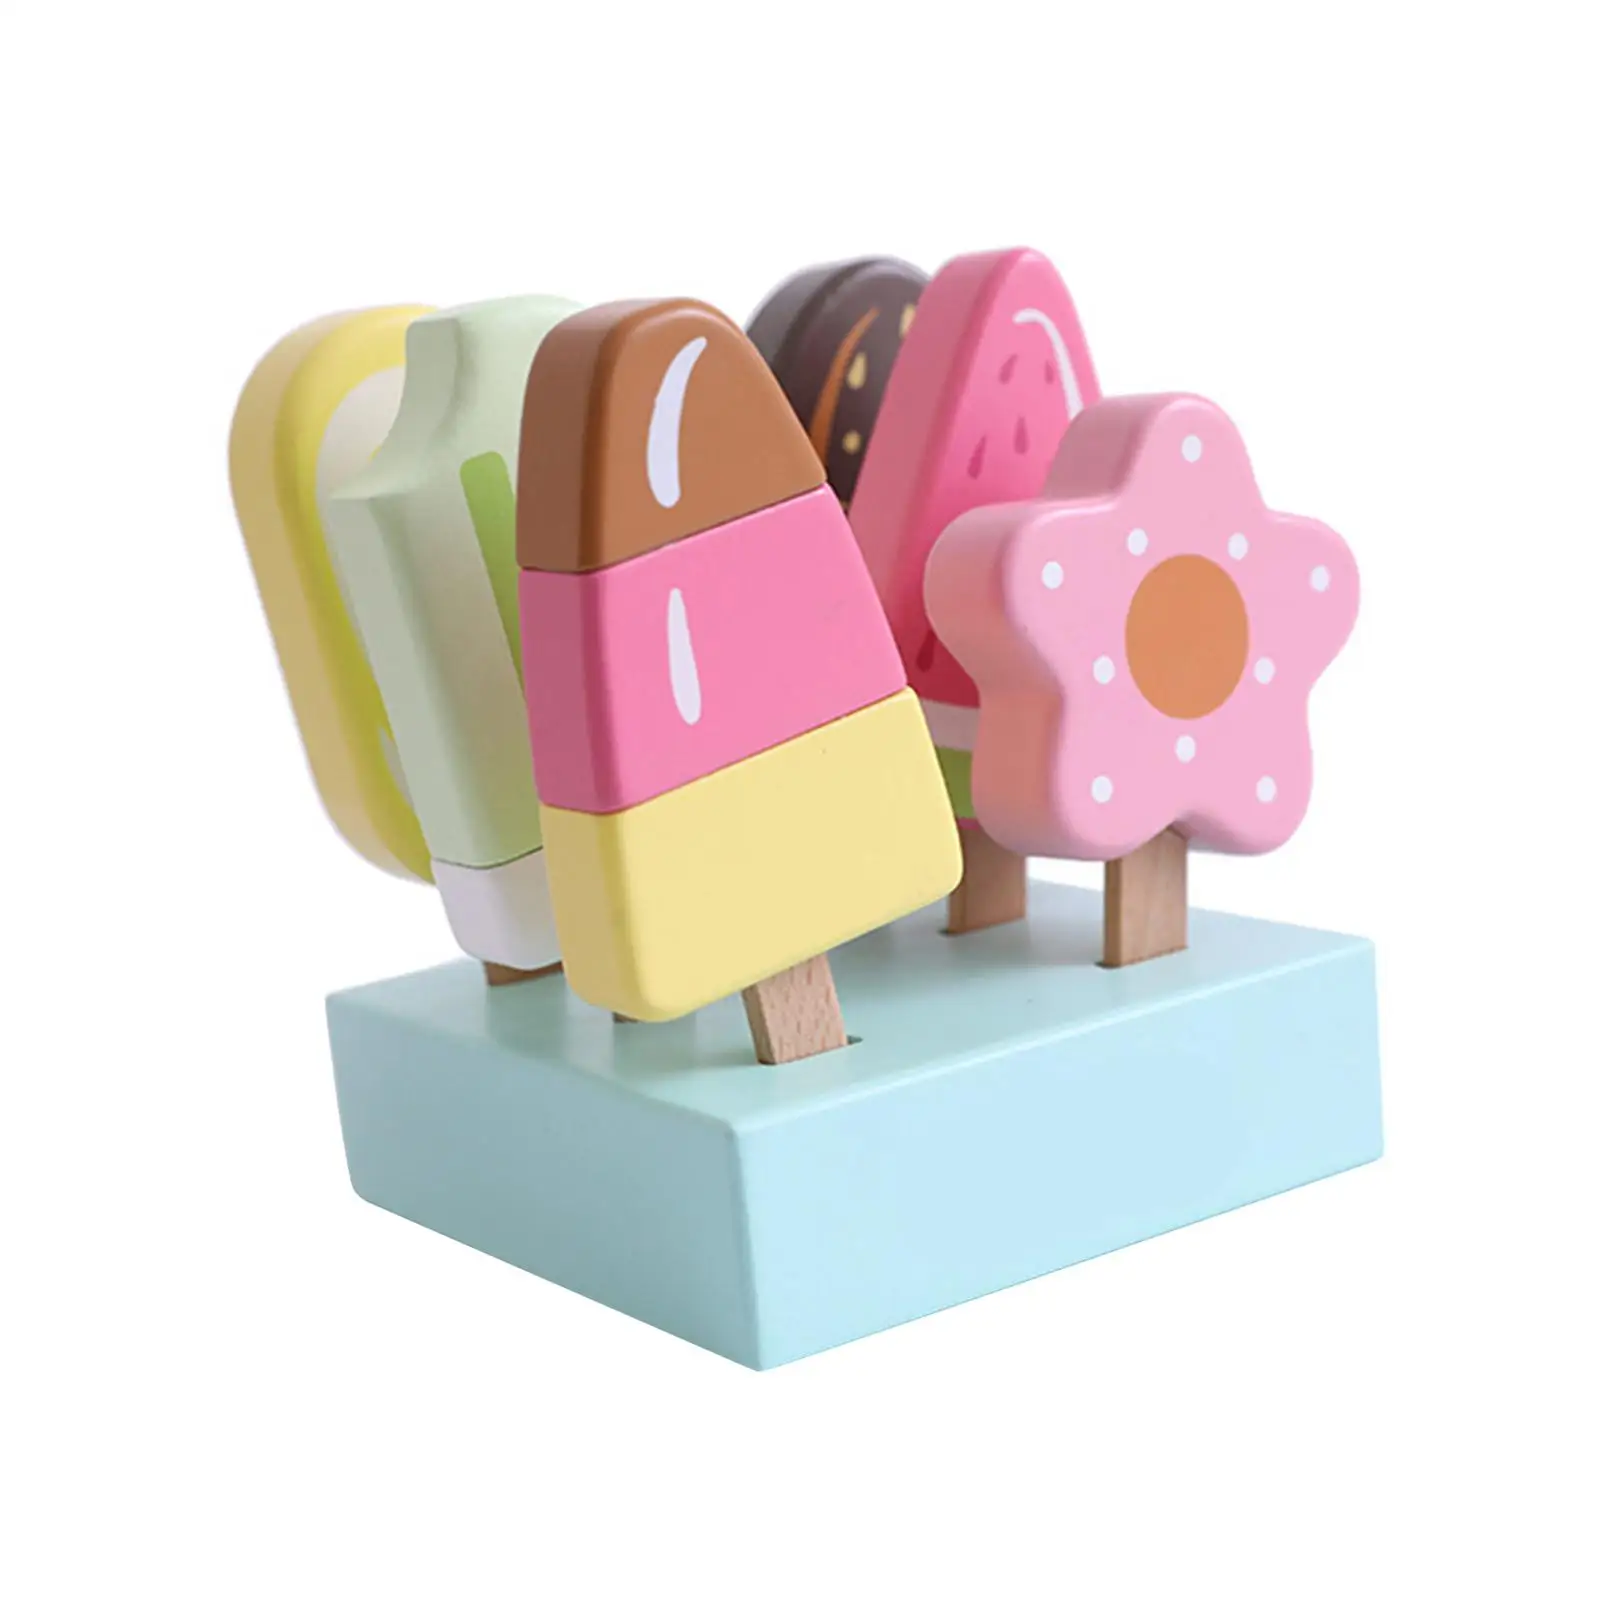 Ice Cream Toy Set Wooden Toy Education Toys with Wooden Popsicle Pretend Toy for Preschool Girls Boys Children Birthday Gifts